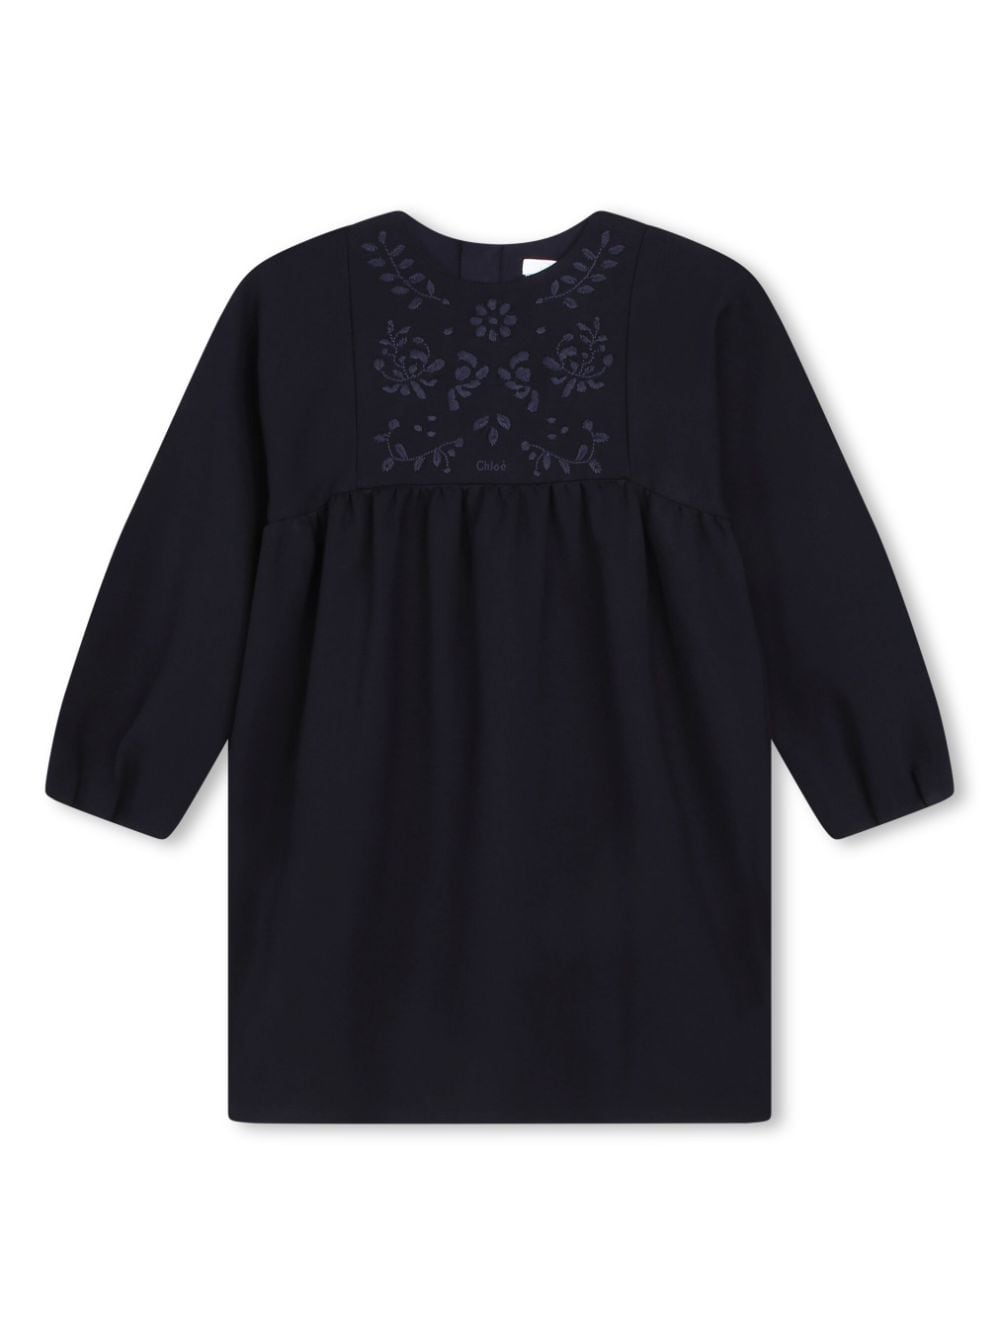 CHLOÉ FLORAL-EMBROIDERED ORGANIC-COTTON BLEND DRESS